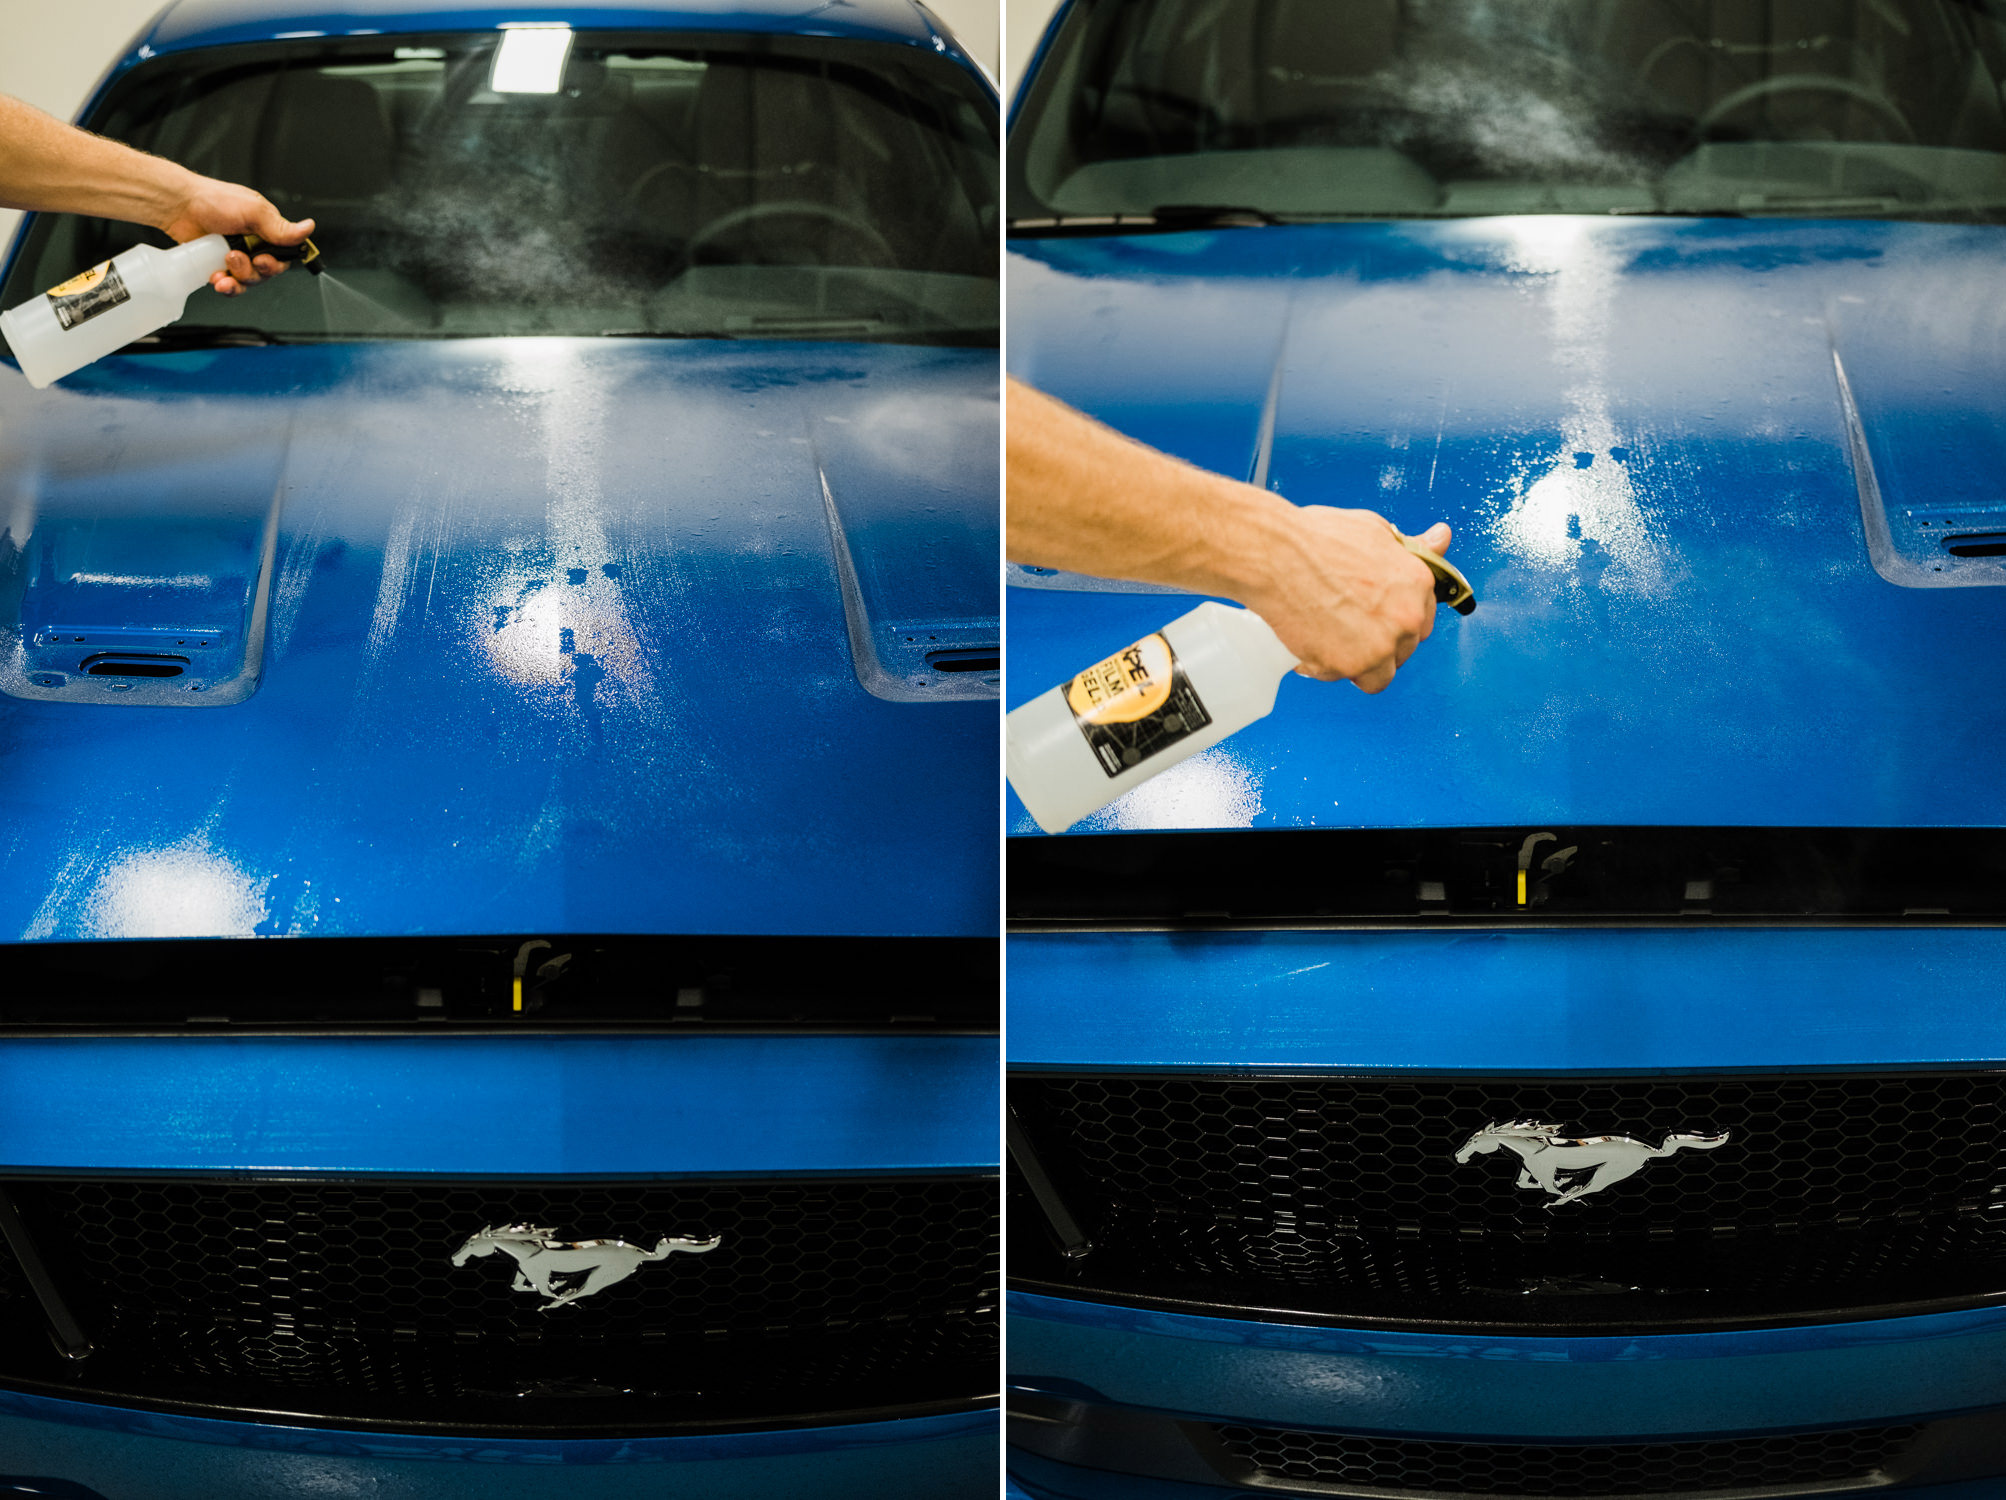 Ford Mustang GT - XPEL Paint Protection Film - Griot's Garage - Paint Correction - Ceramic Pro Coating - Ceramic Coating - XPEL Window Tint - Wichita Clear Bra-101.jpg